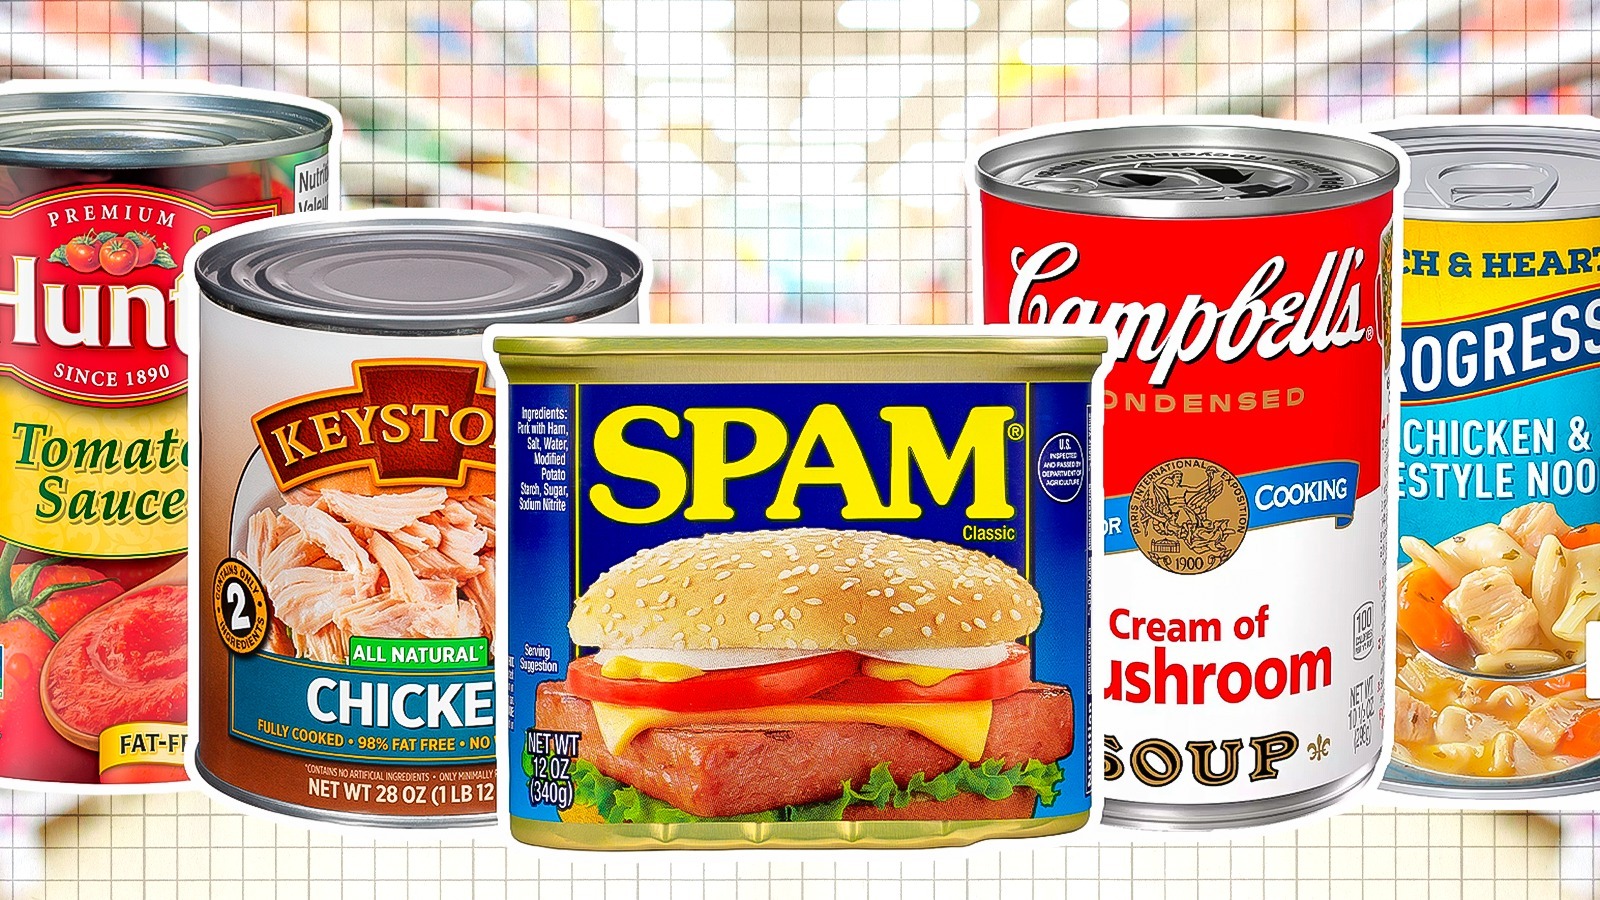 https://www.thedailymeal.com/img/gallery/13-canned-foods-you-should-avoid-at-the-grocery-store/l-intro-1688139829.jpg